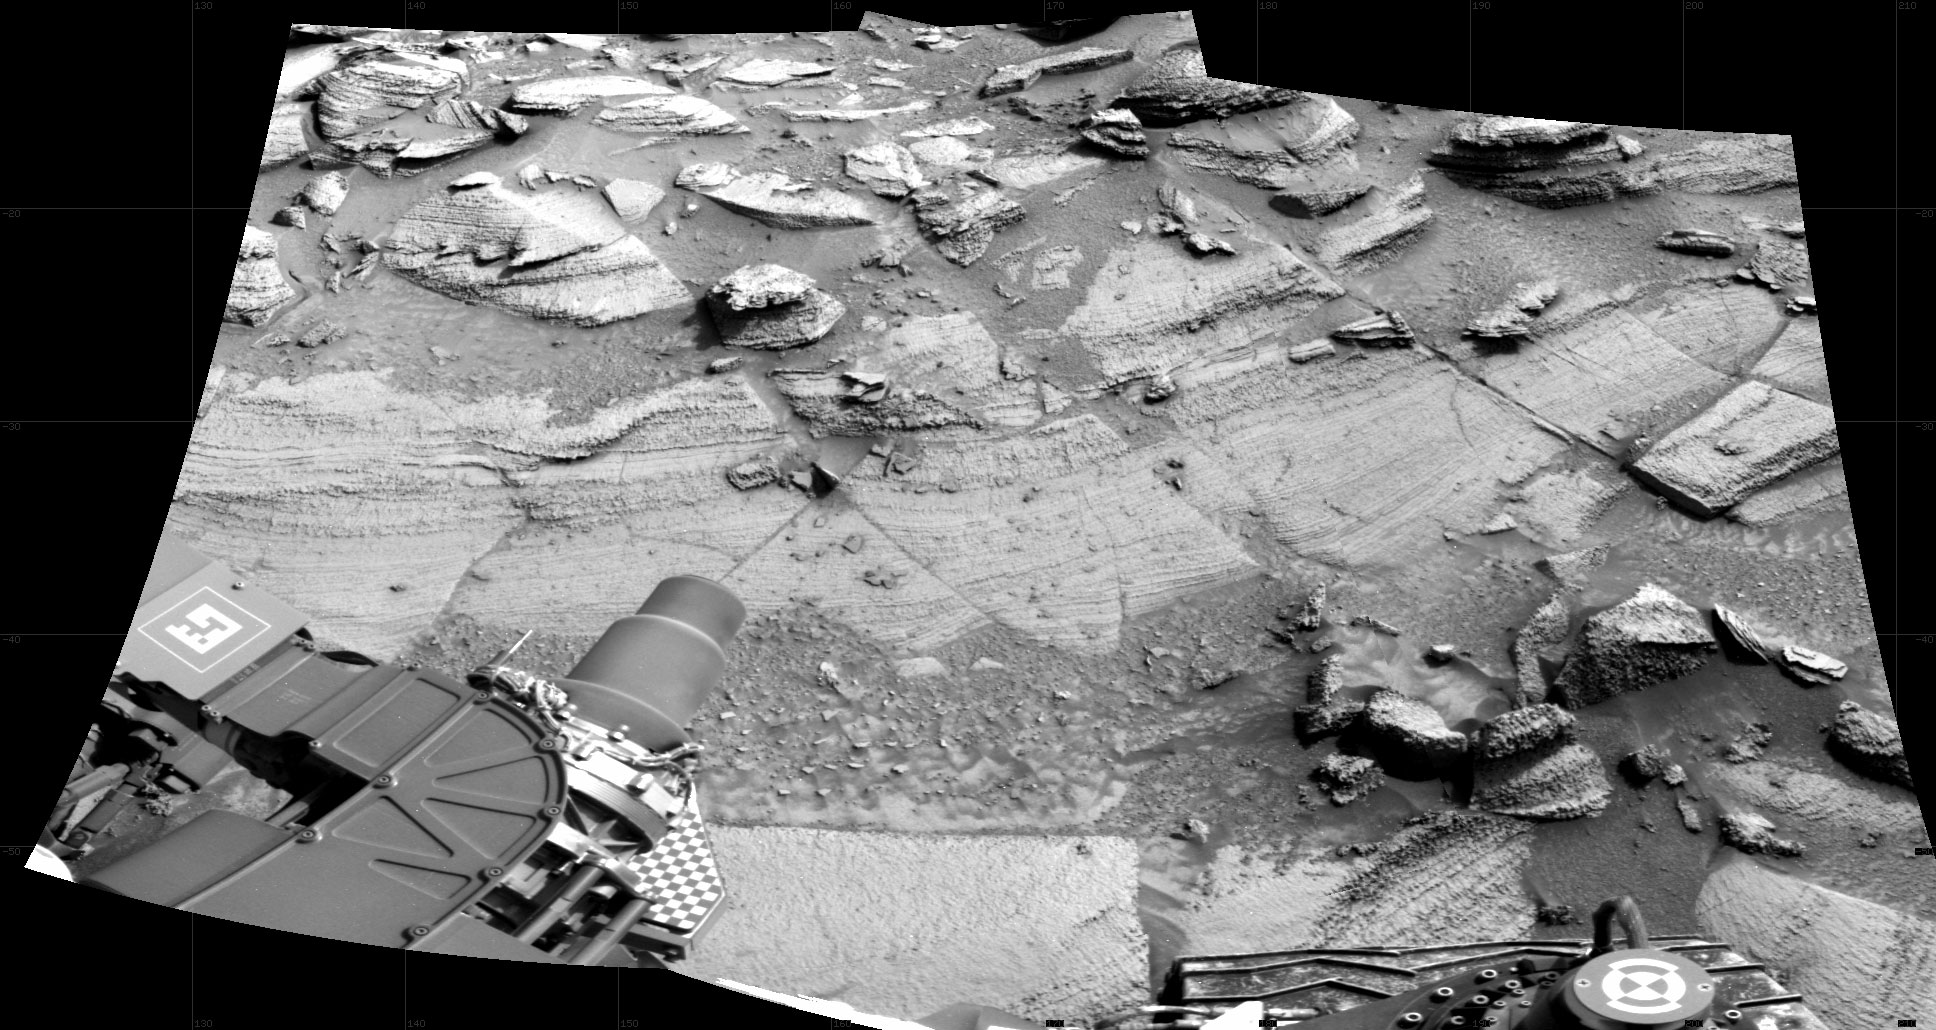 NASA's Mars rover Curiosity took 2 images in Gale Crater using its mast-mounted Right Navigation Camera (Navcam) to create this mosaic. The seam-corrected mosaic provides a 91-degree cylindrical projection panorama of the Martian surface centered at 166 degrees azimuth (measured clockwise from north).